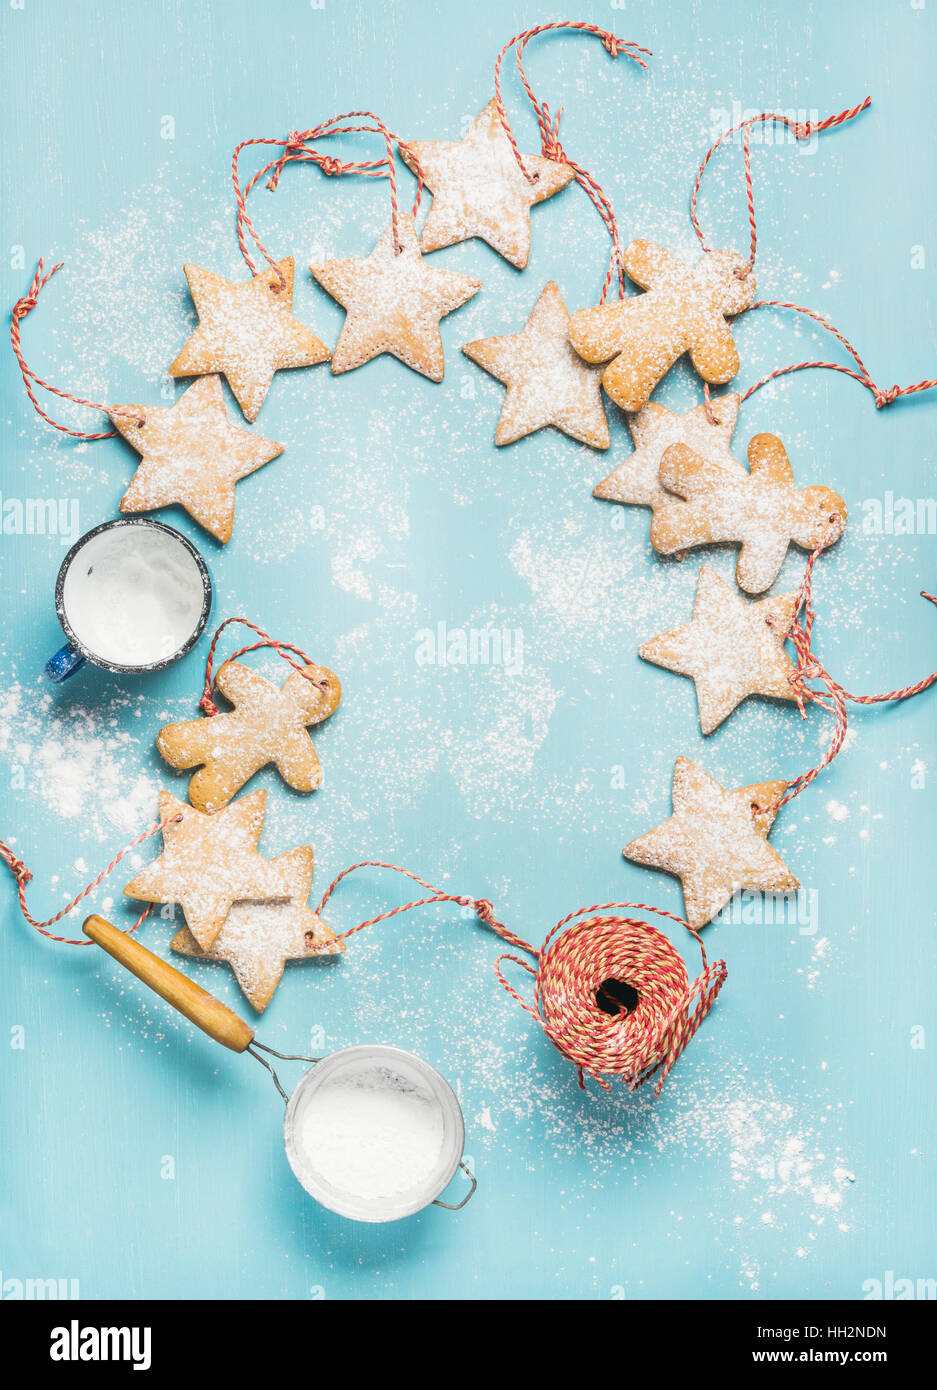 Christmas gingerbread cookies with sugar powder and decoration rope Stock Photo